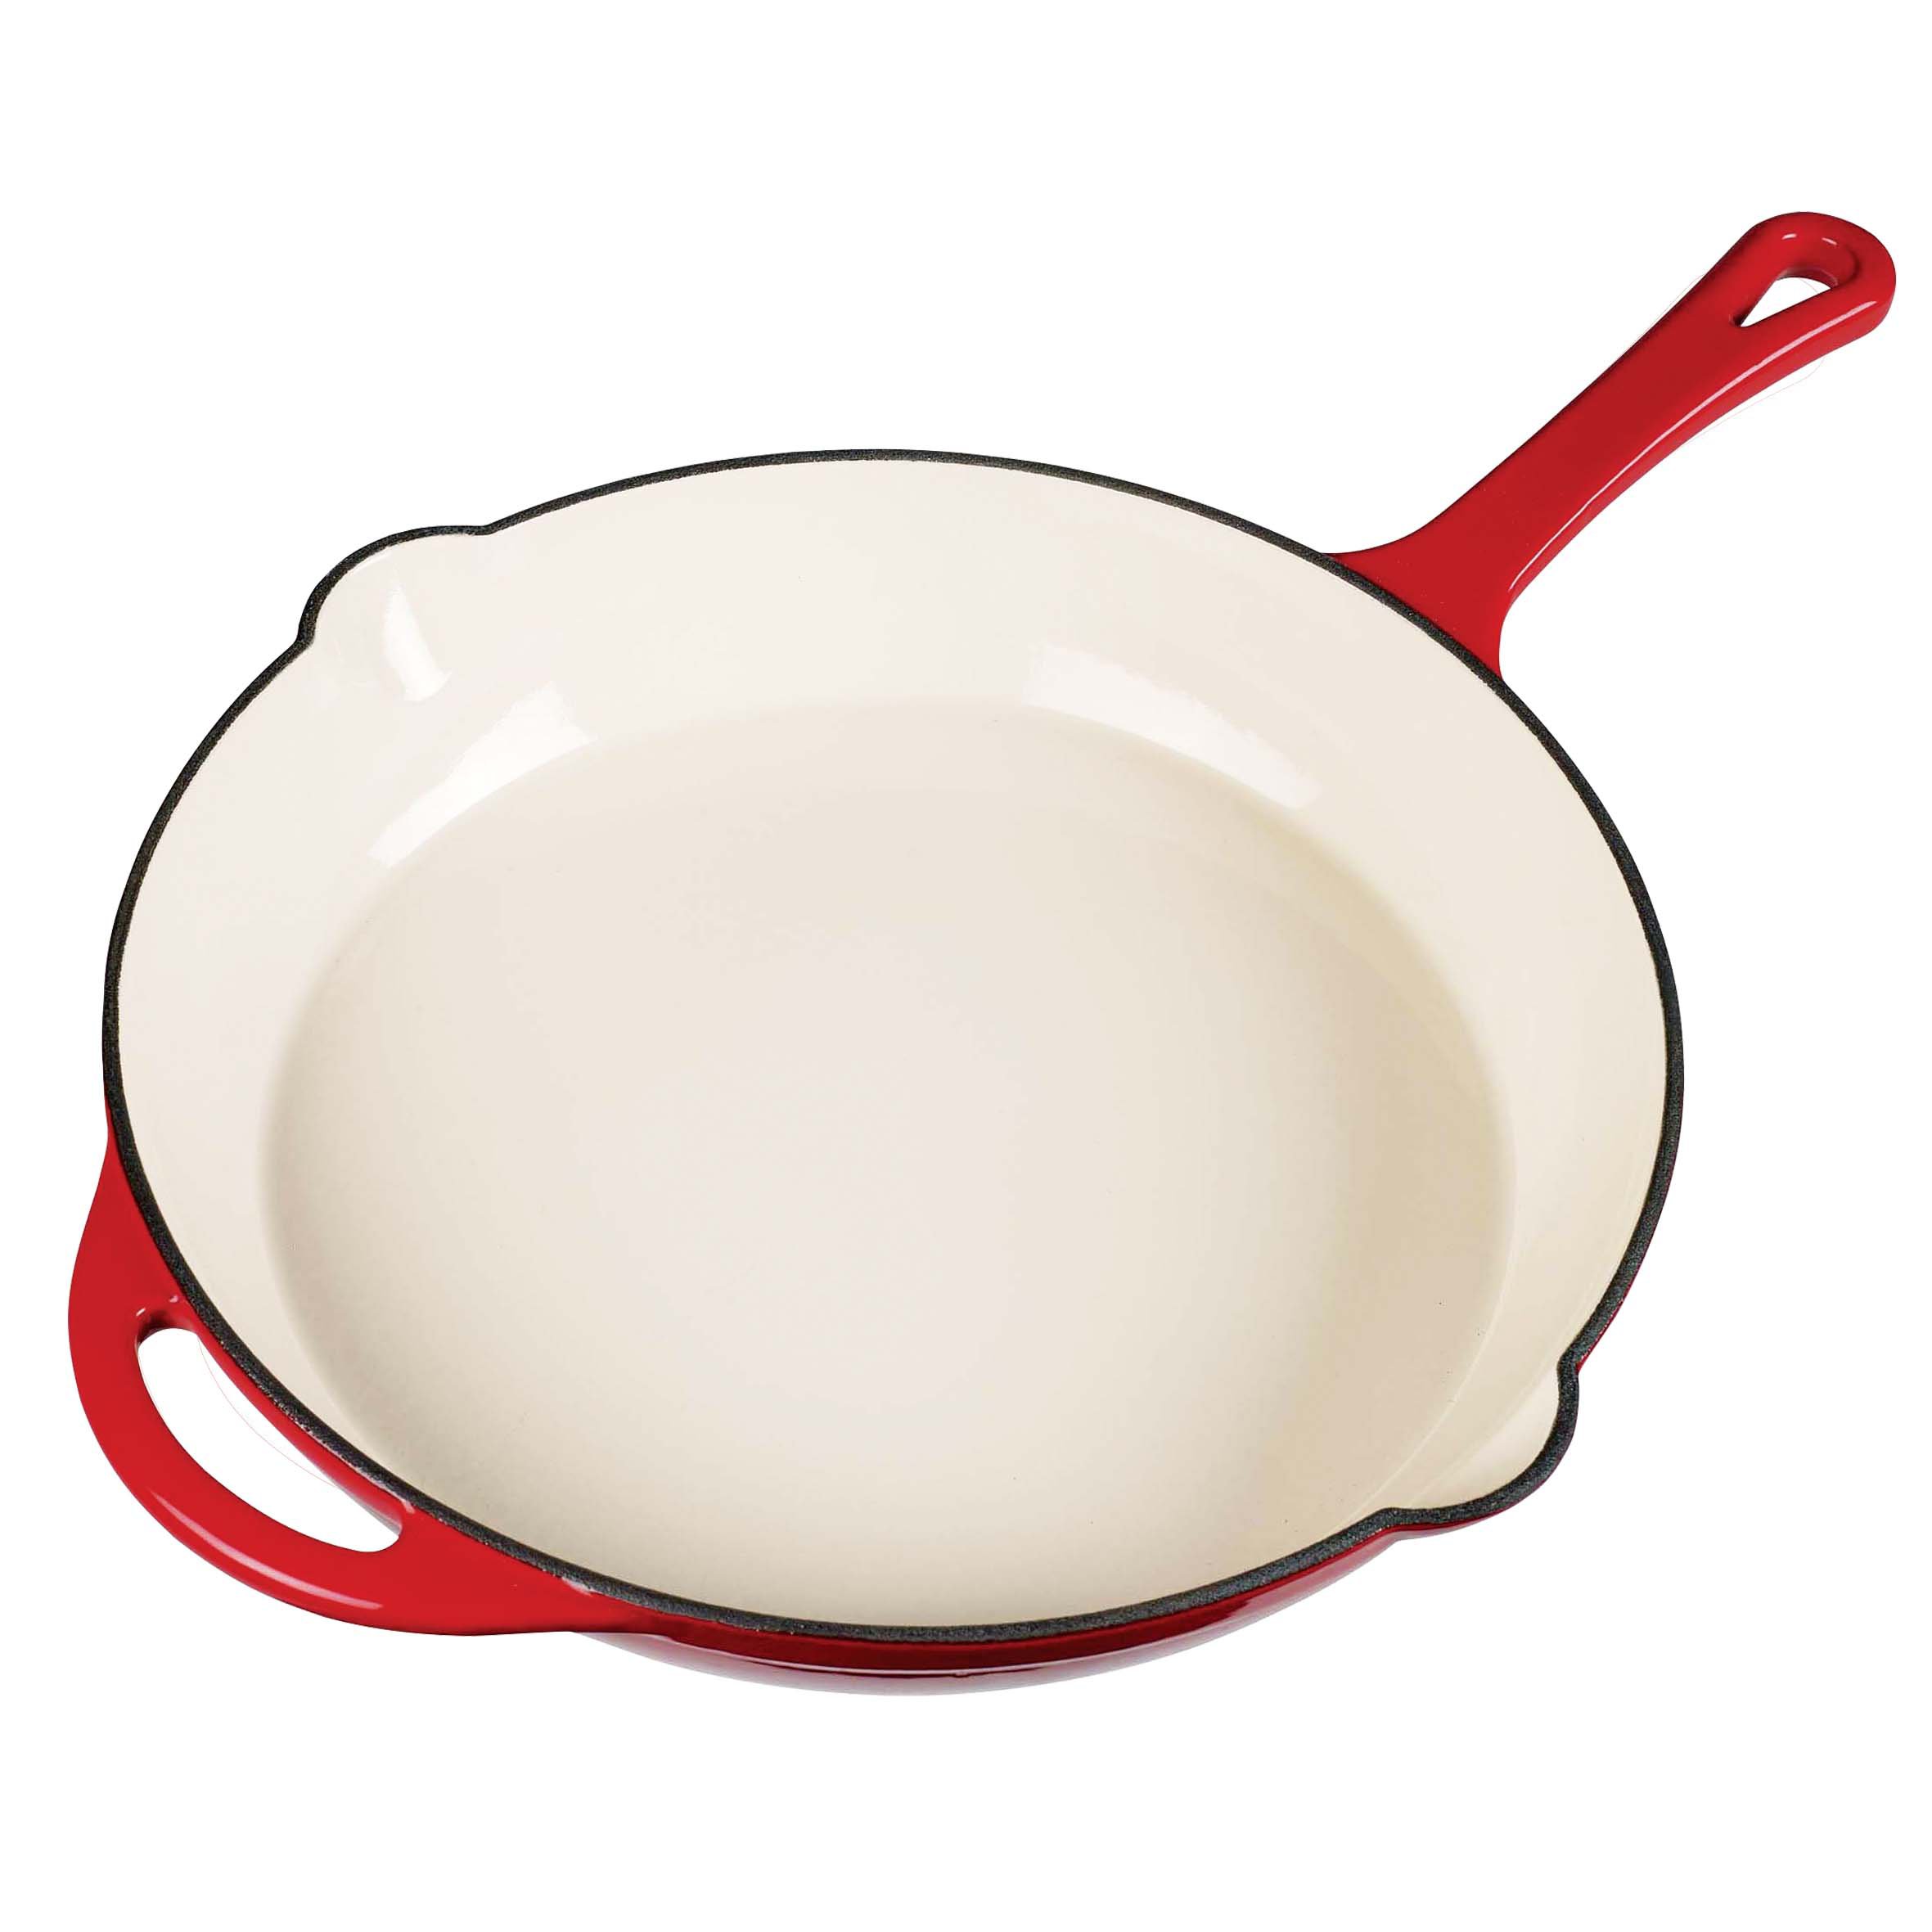 Cookpro 447 Cast Iron Enameled Skillet Cookware Set, Red, 1 - Fred